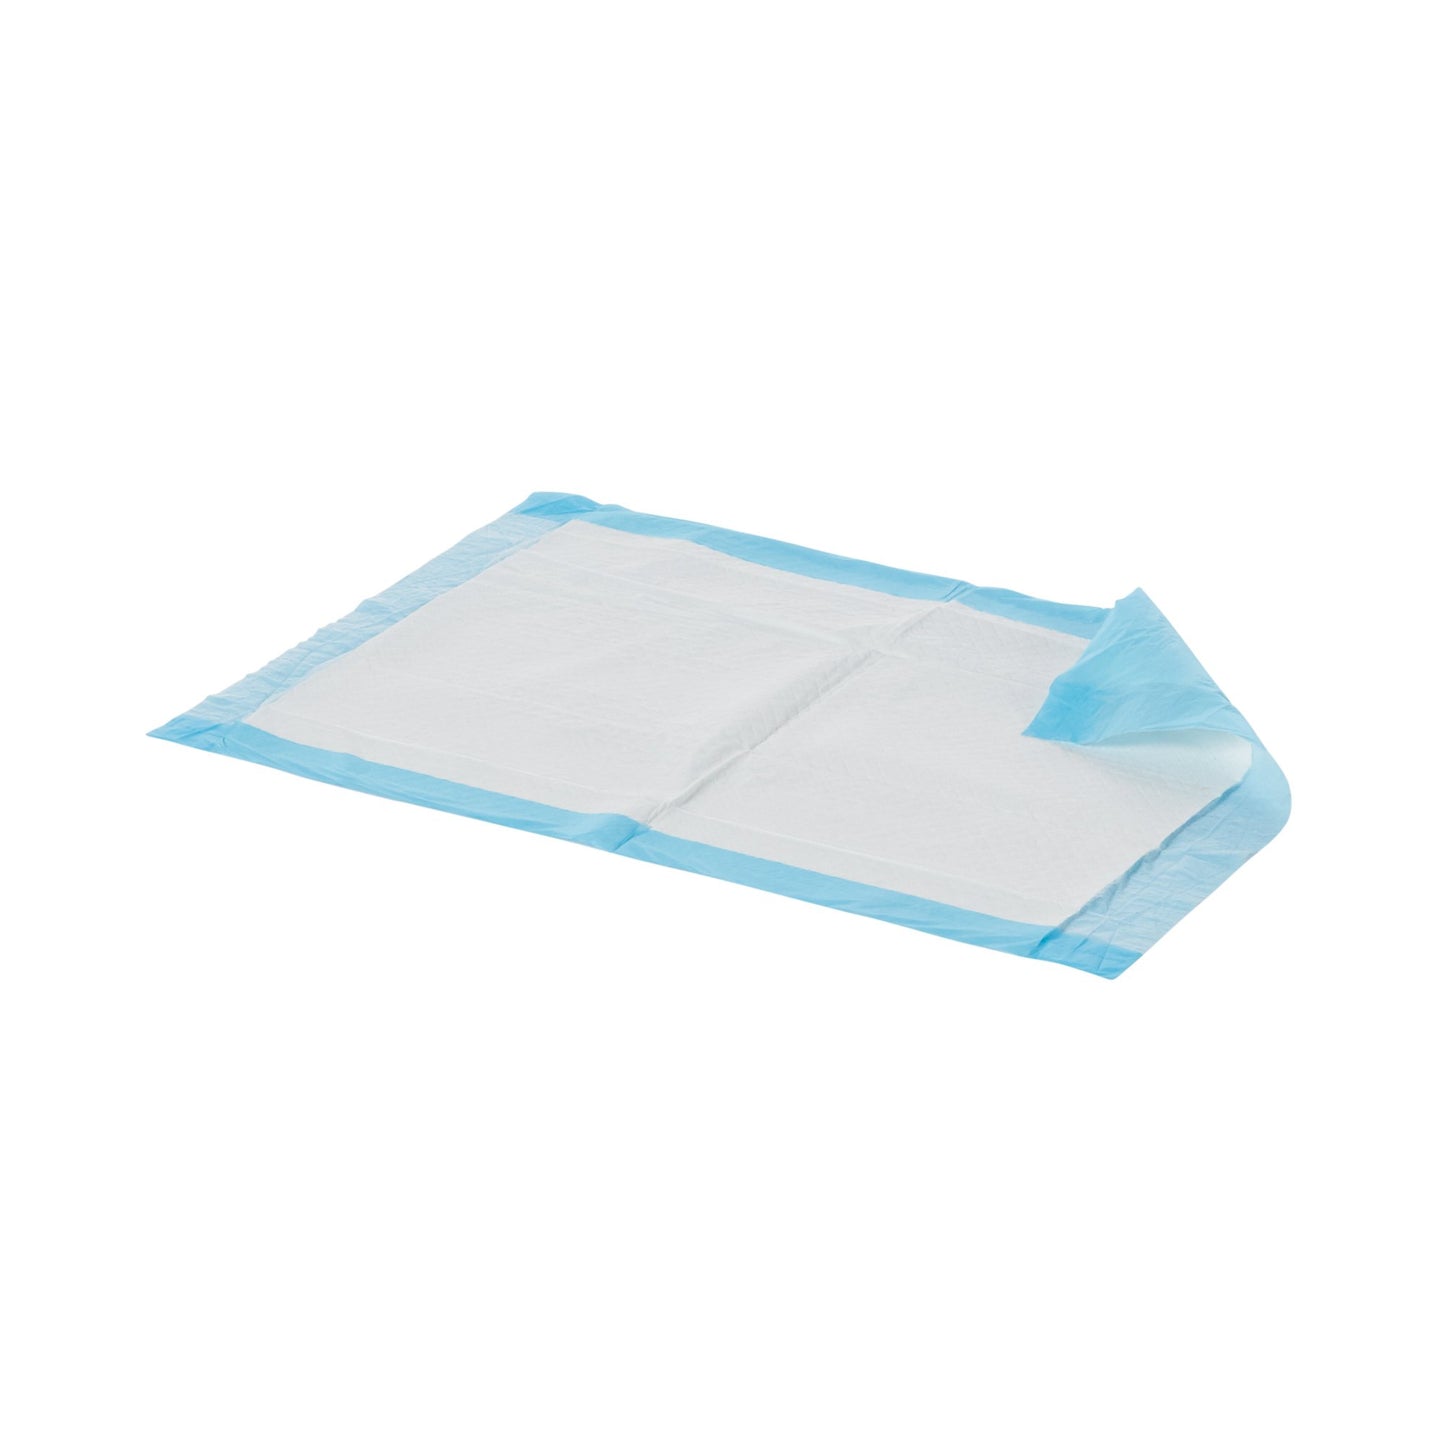 Dynarex® Absorbent Fluff Fill Underpad, 23 x 36 In., 150 ct.